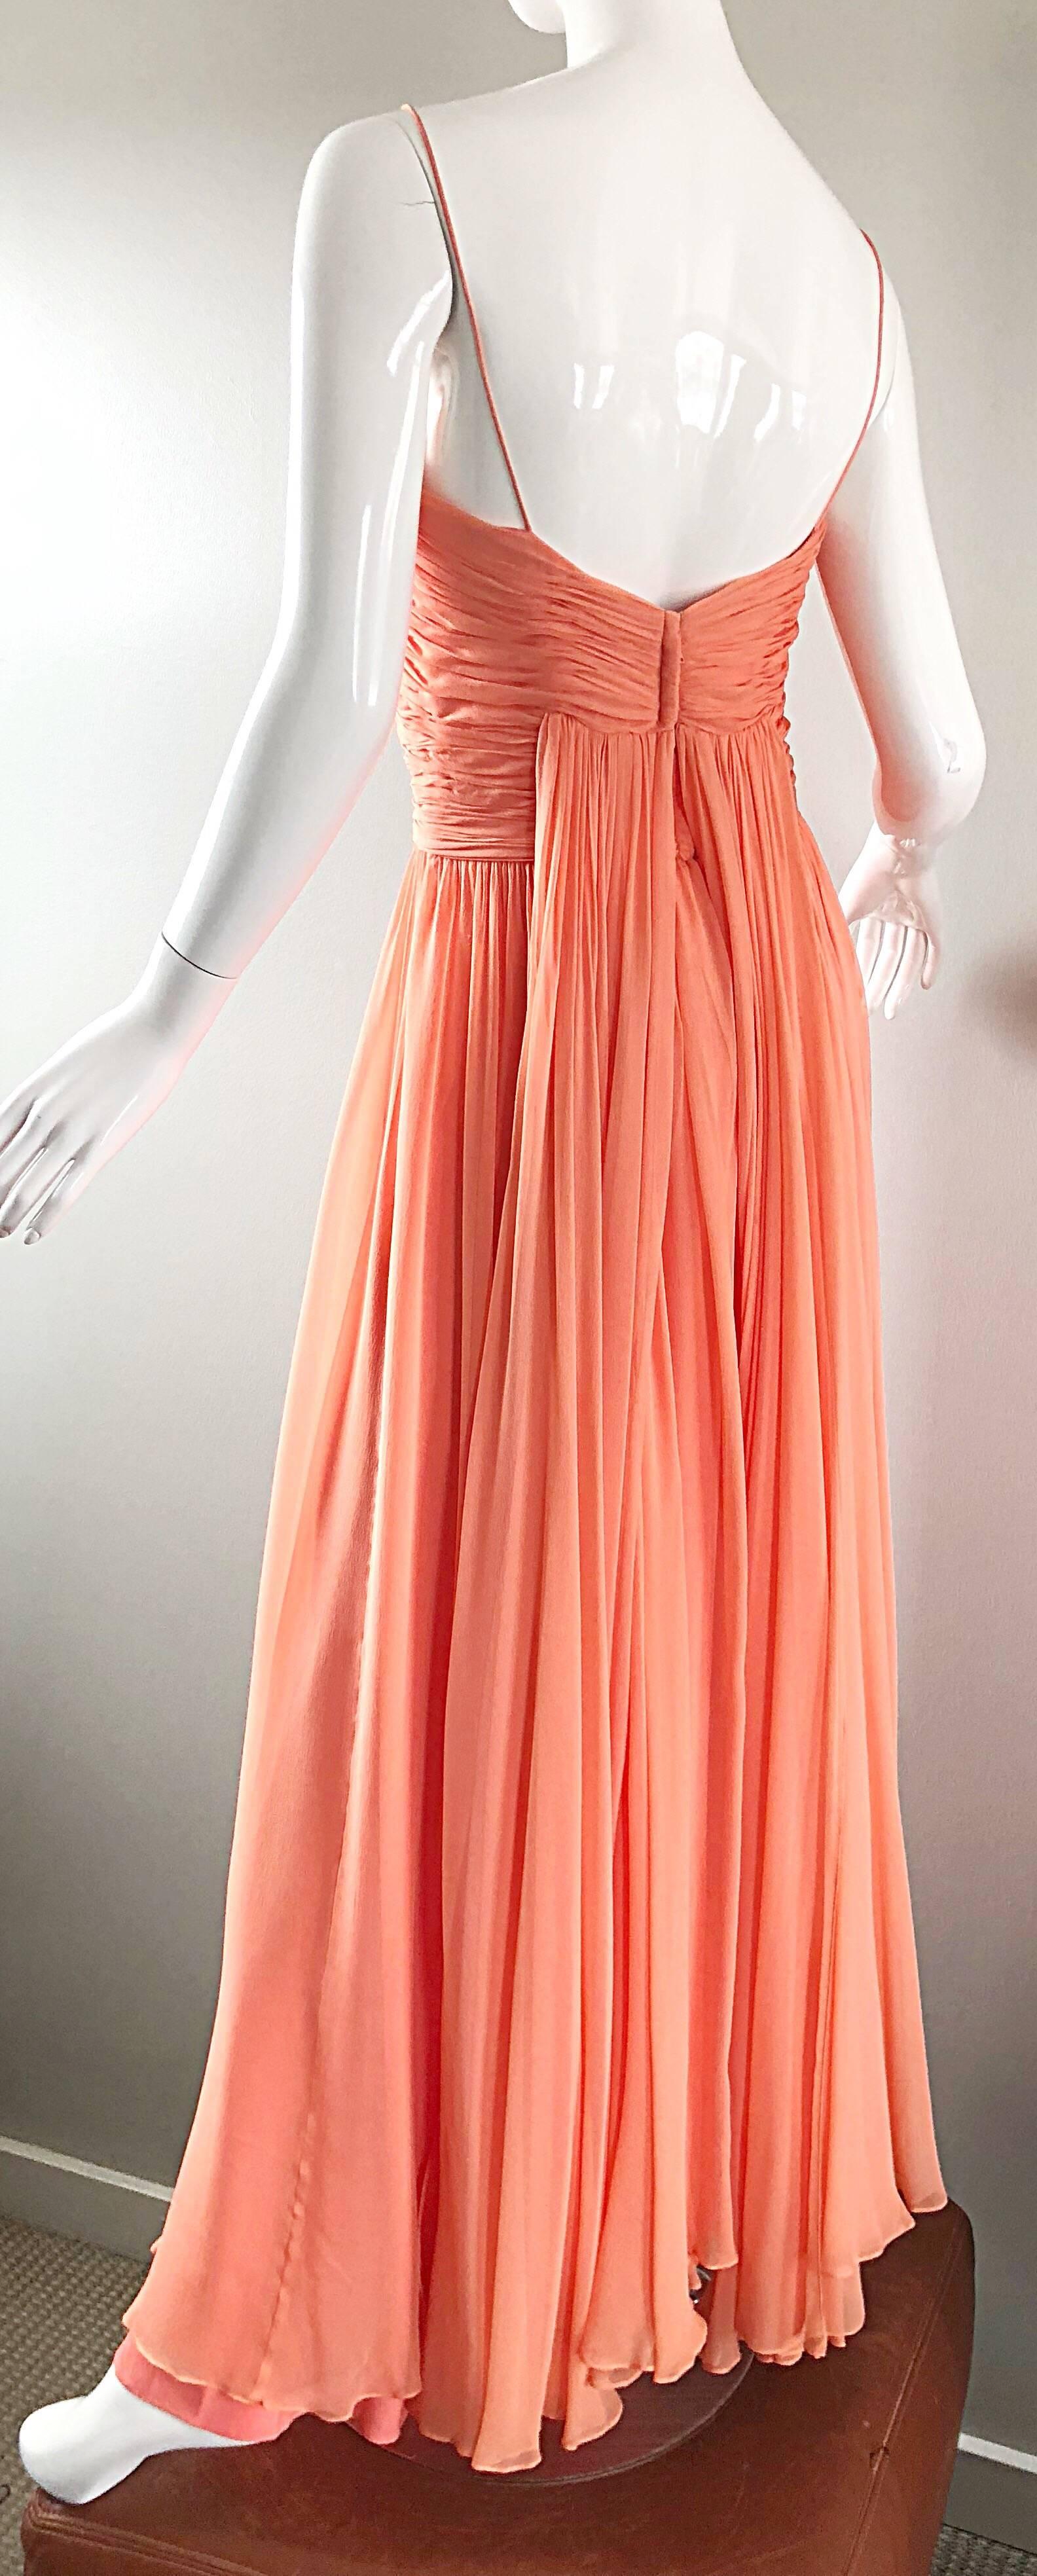 Gorgeous 1950s Saks 5th Ave. Salmon / Coral Pink Silk Chiffon Vintage 50s Gown 2